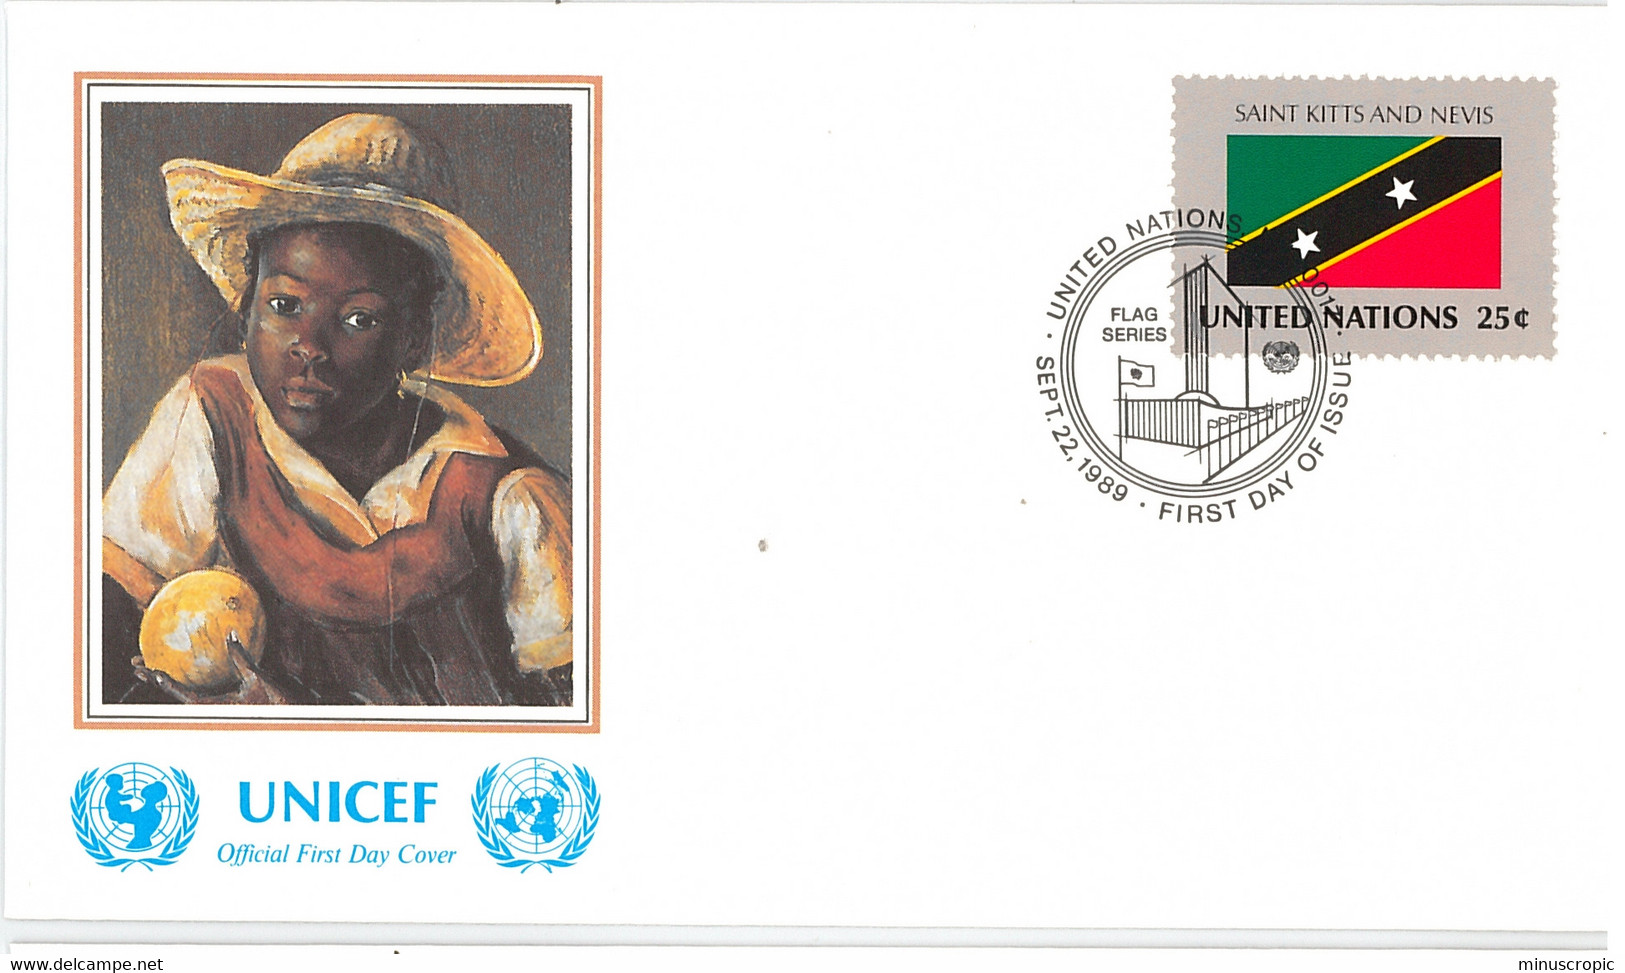 Enveloppe FDC United Nations - UNICEF - Flag Series 13/89 - Saint Kitts And Nevis - 1989 - Lettres & Documents